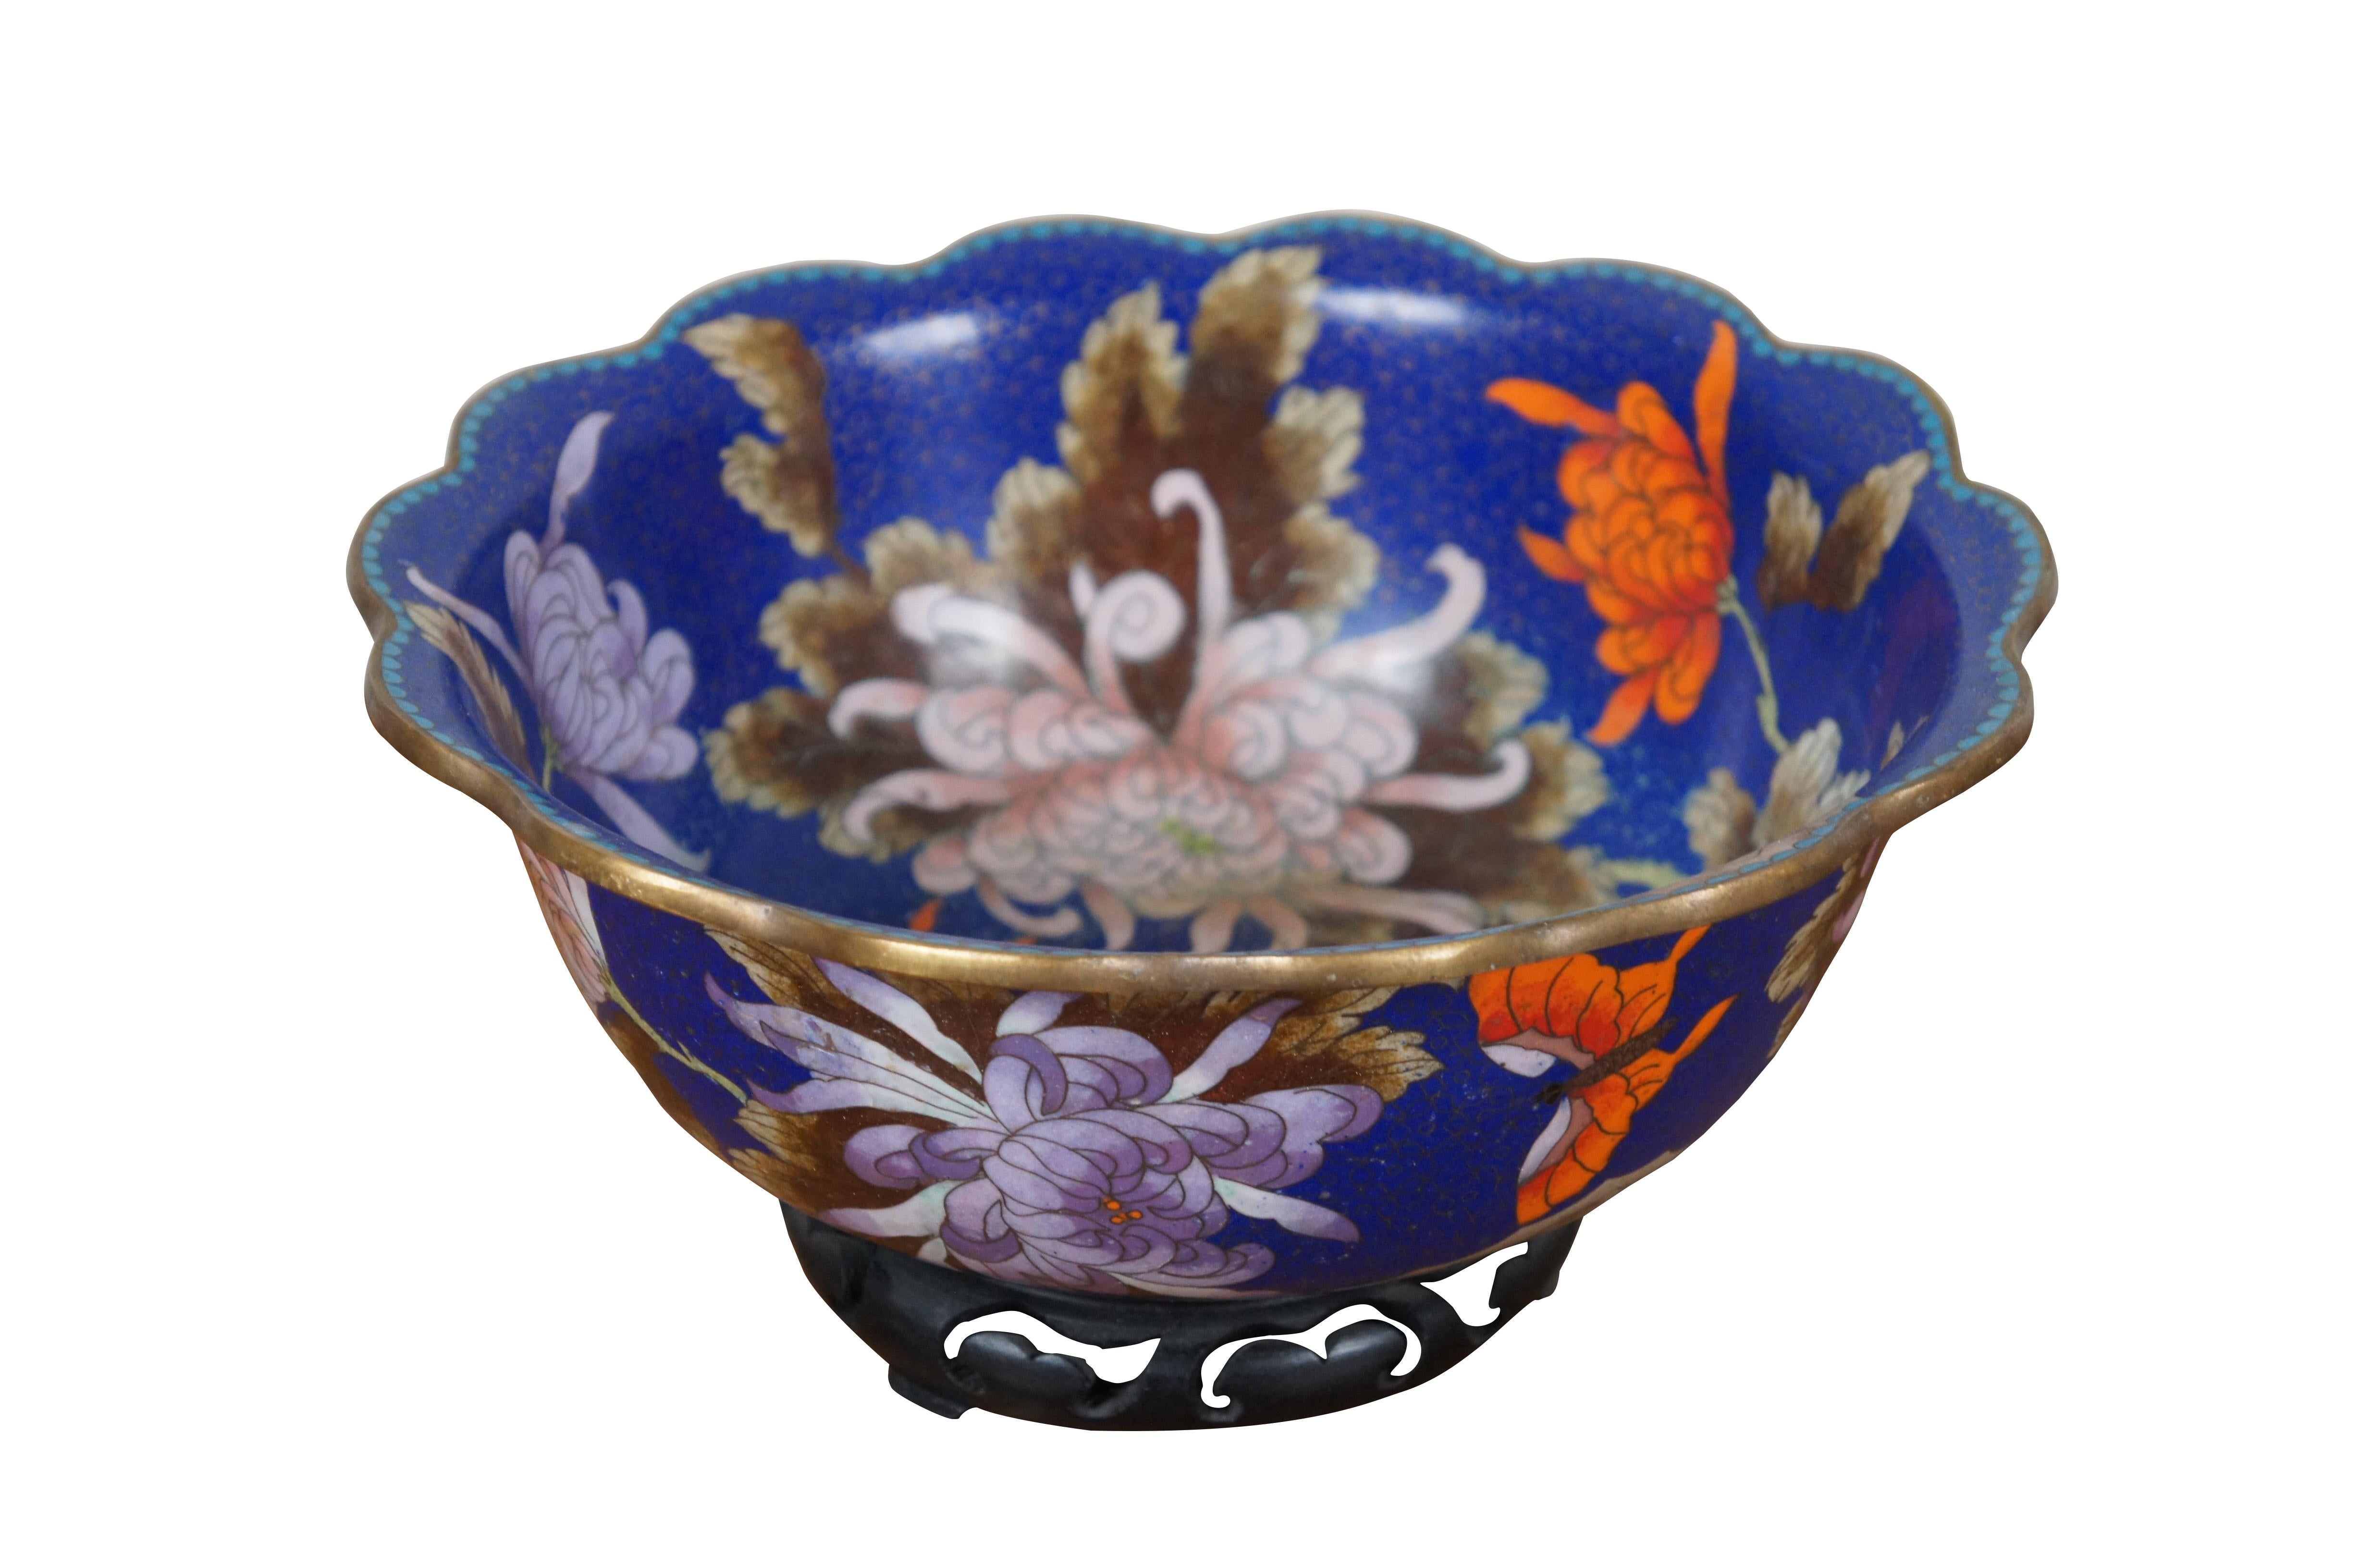 Vintage Chinese cloisonne bowl / centerpiece with scalloped rim, decorated with pink and orange chrysanthemums, brown and green leaves, scalloped turquoise trim, and orange butterflies on a floral patterned background of deep sapphire blue. Includes